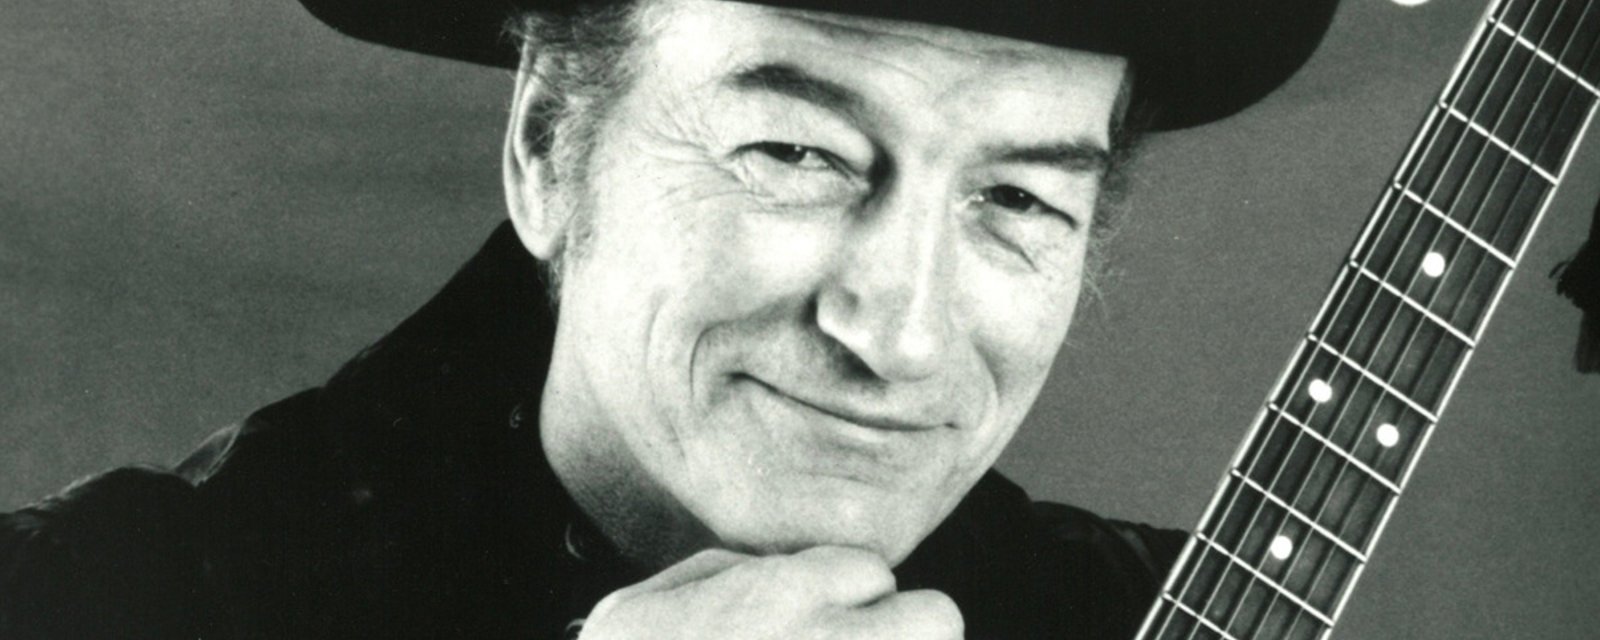 Iconic anthem “The Hockey Song” by Stompin’ Tom Connors receives special honor in Canada